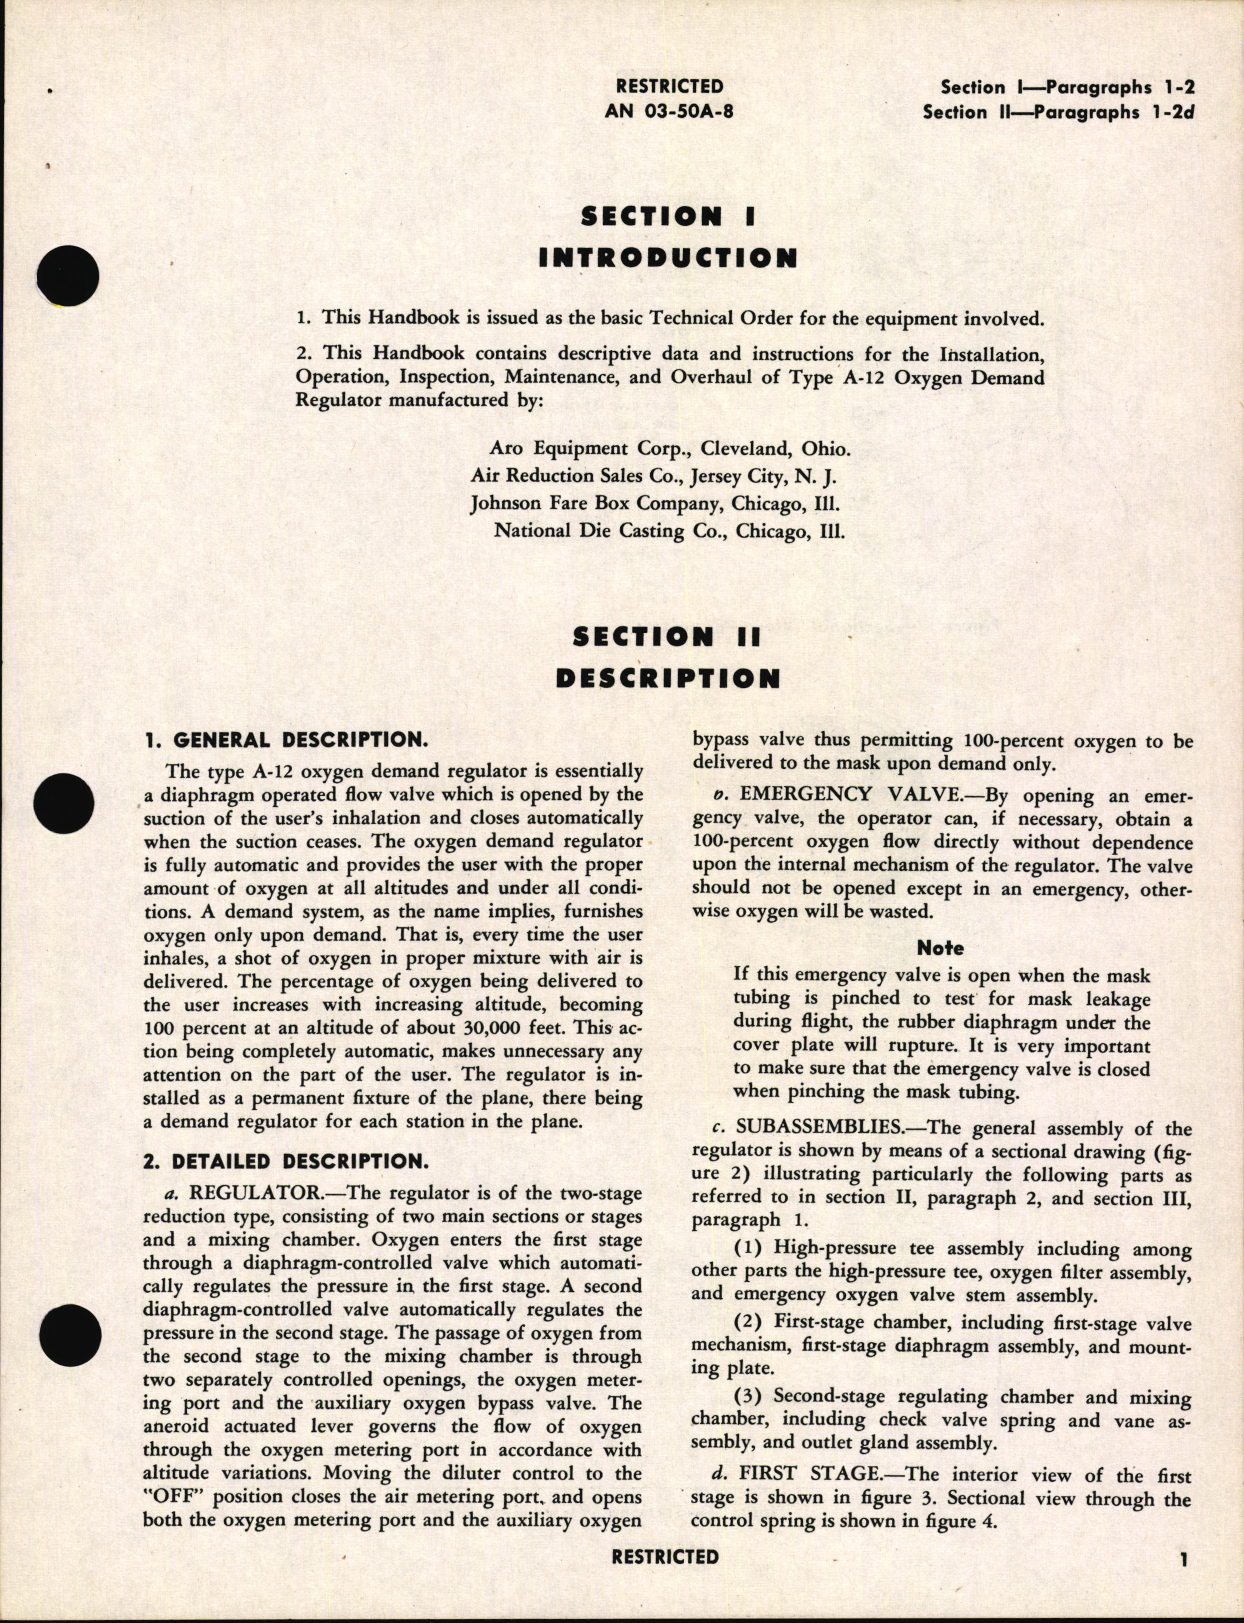 Sample page 5 from AirCorps Library document: Handbook of Instructions with Parts Catalog for Demand Oxygen Regulator Type A-12